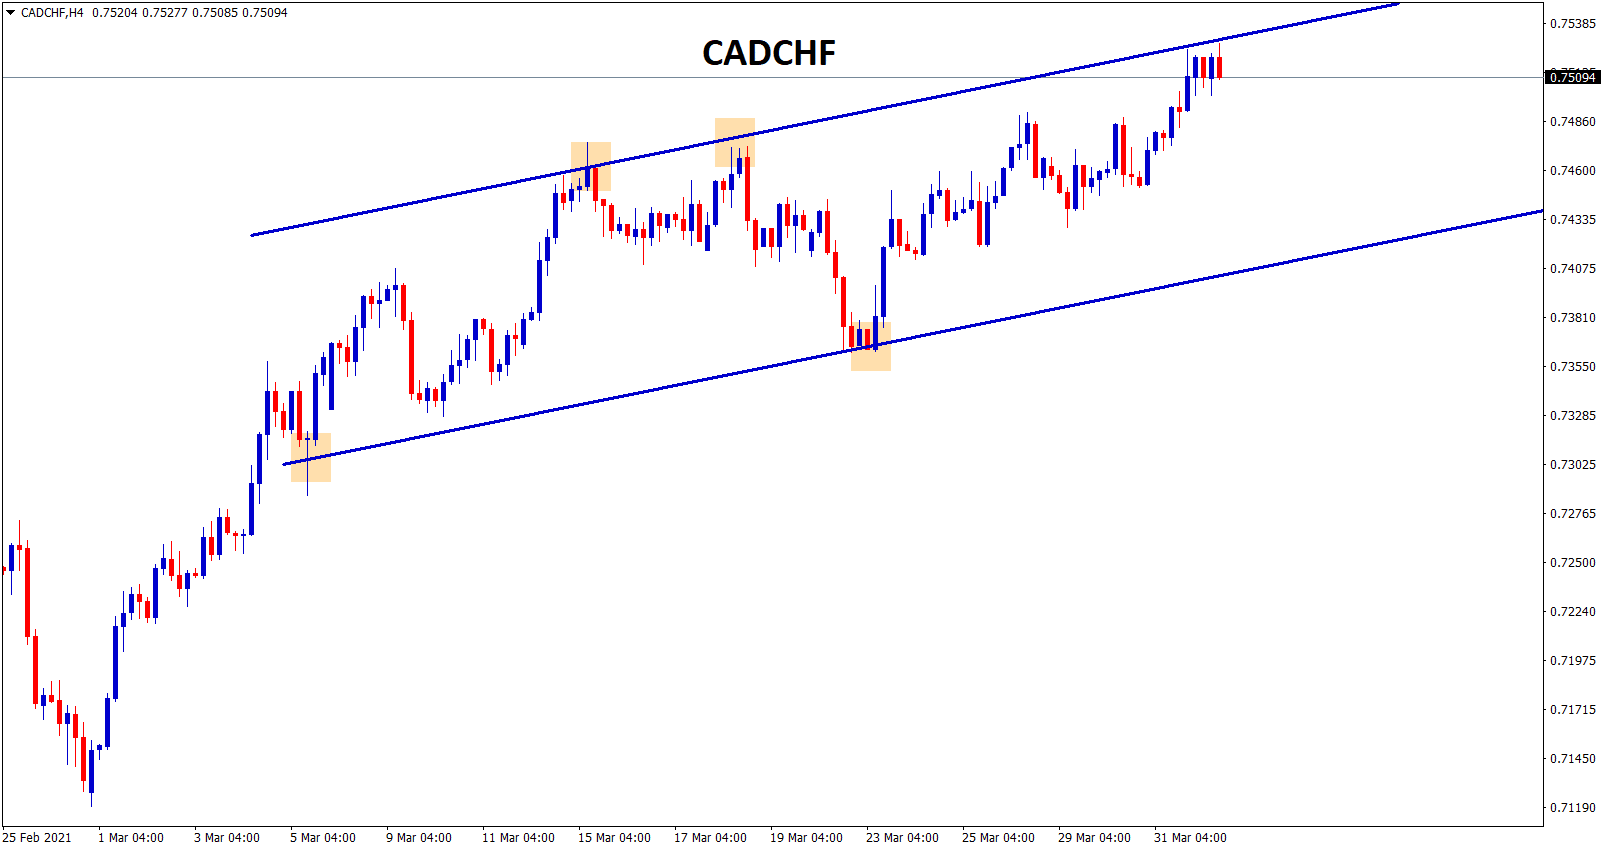 CADCHF in an uptrend channel range